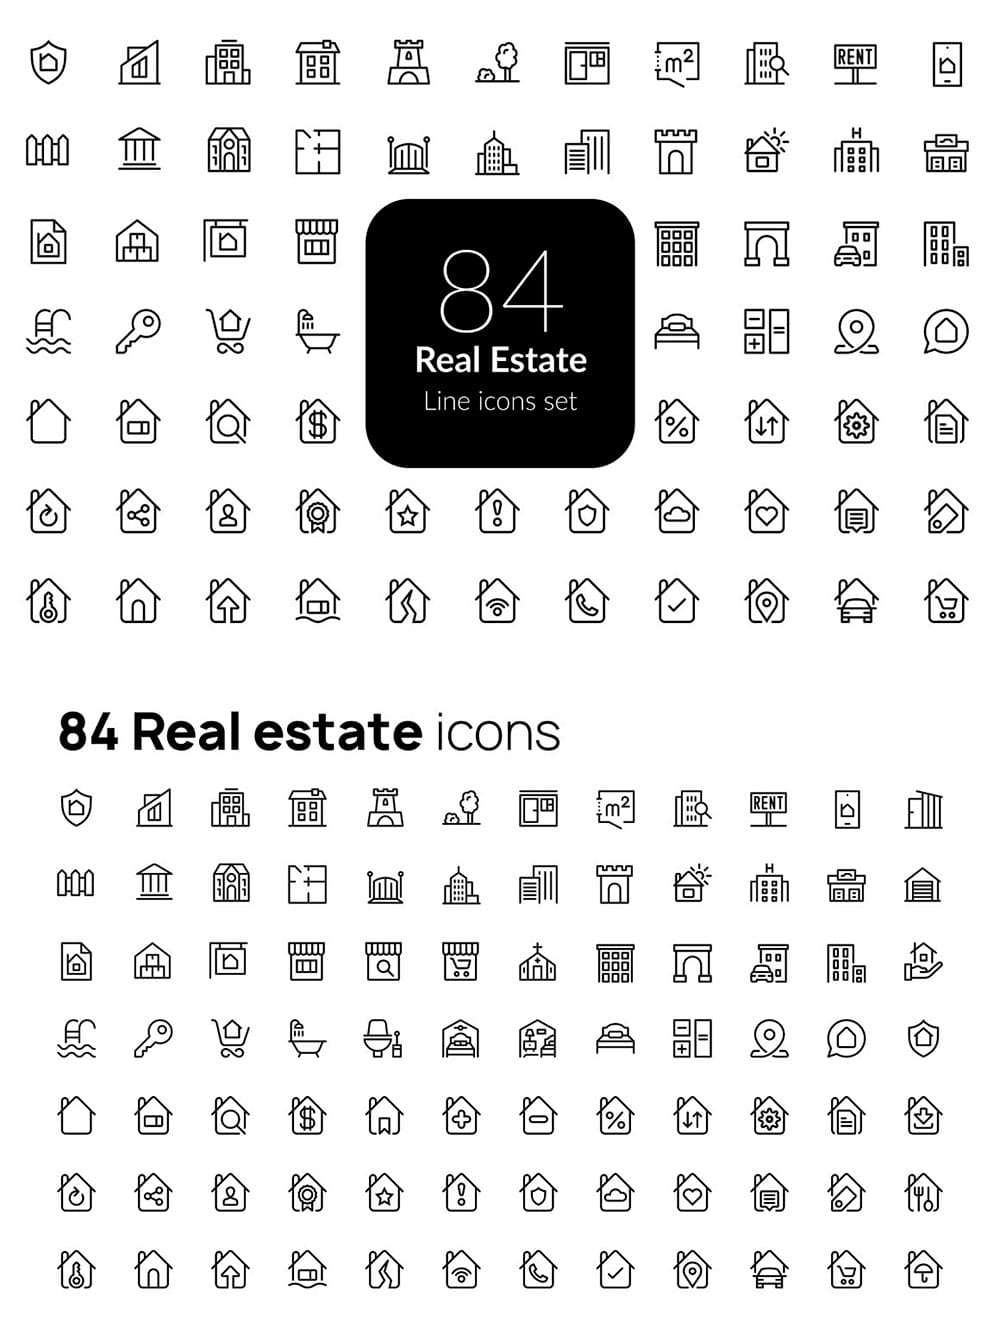 Real estate line icons set, picture for pinterest.